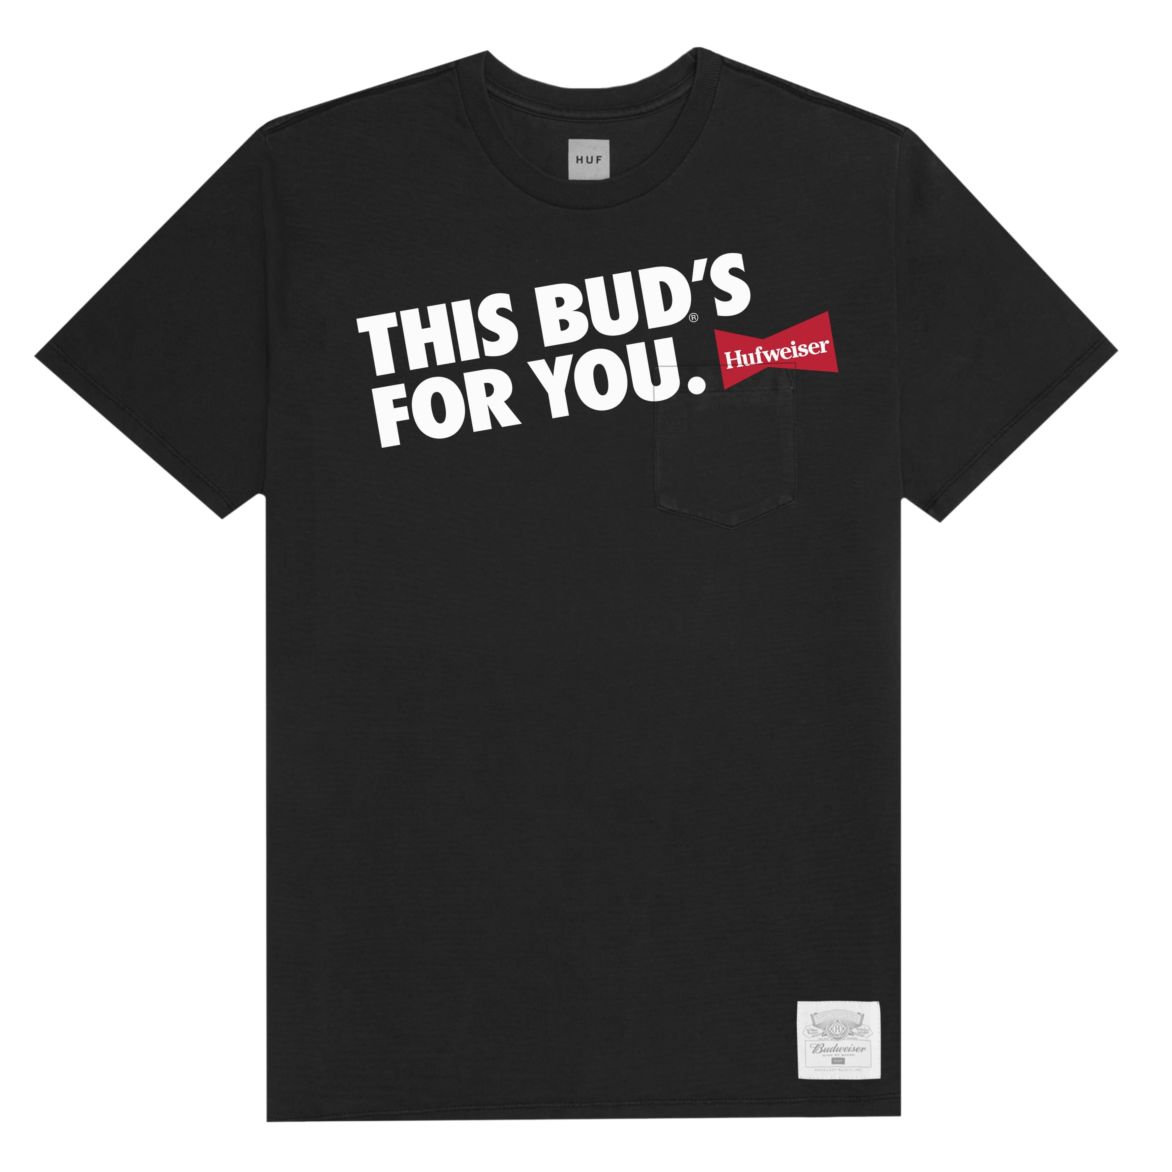 HUF x Budweiser Buds For You Men's S/S Tee, Black